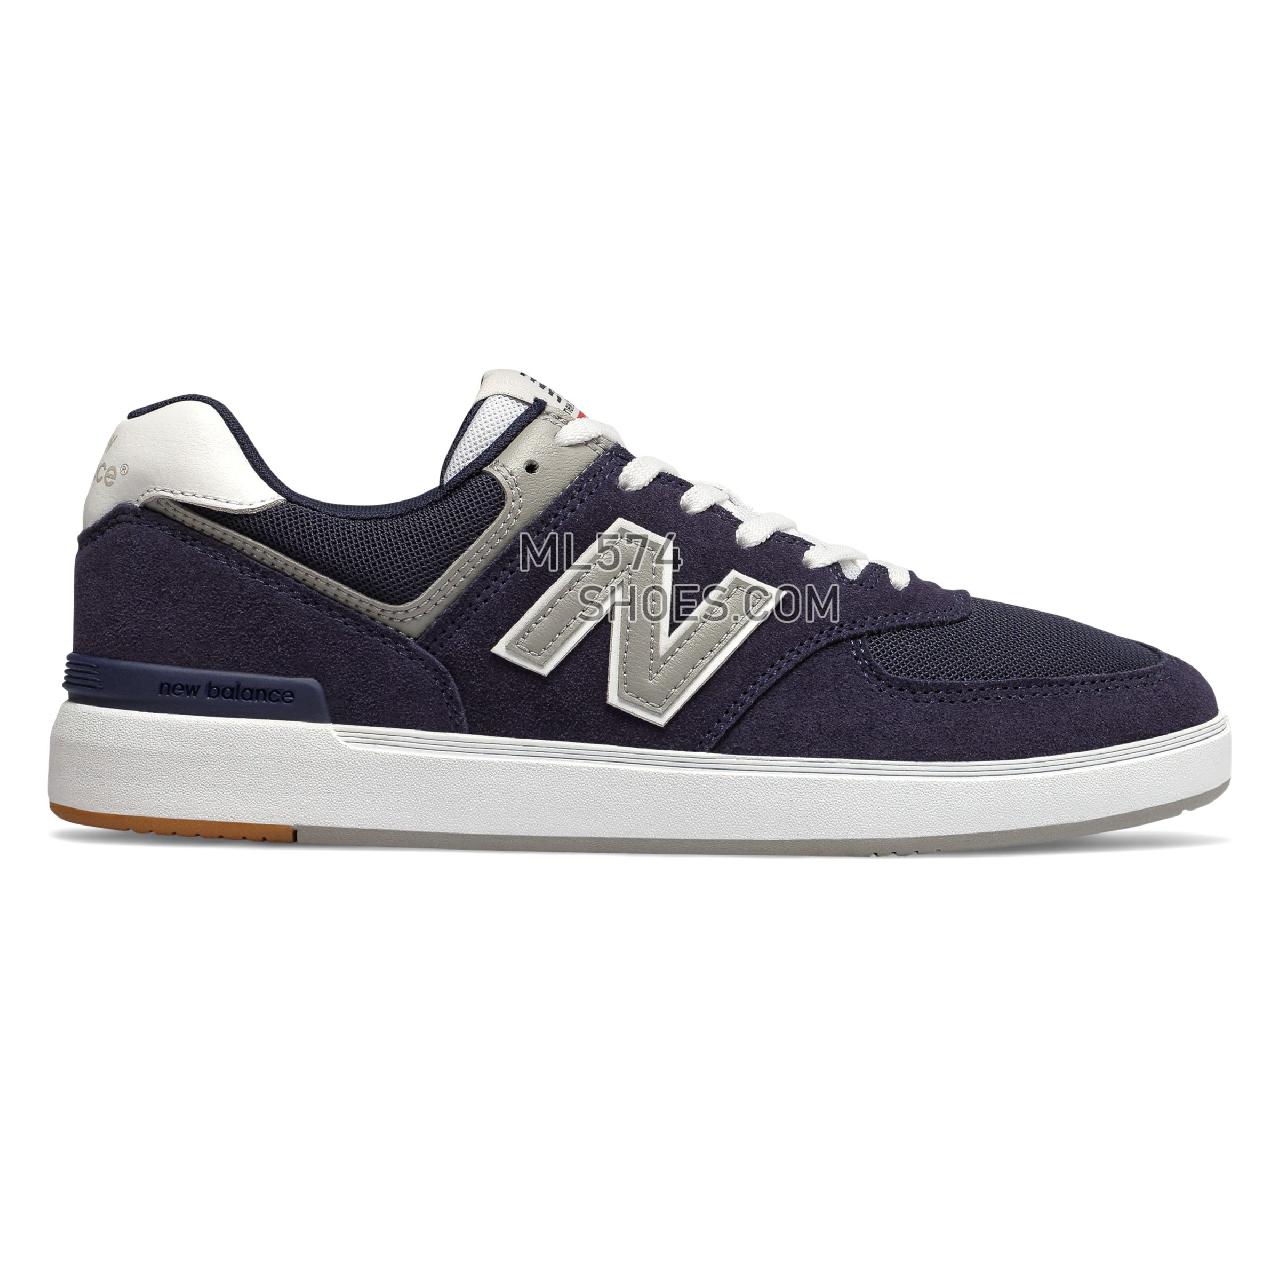 New Balance AM574 - Men's Court Classics - Navy with White - AM574NYR